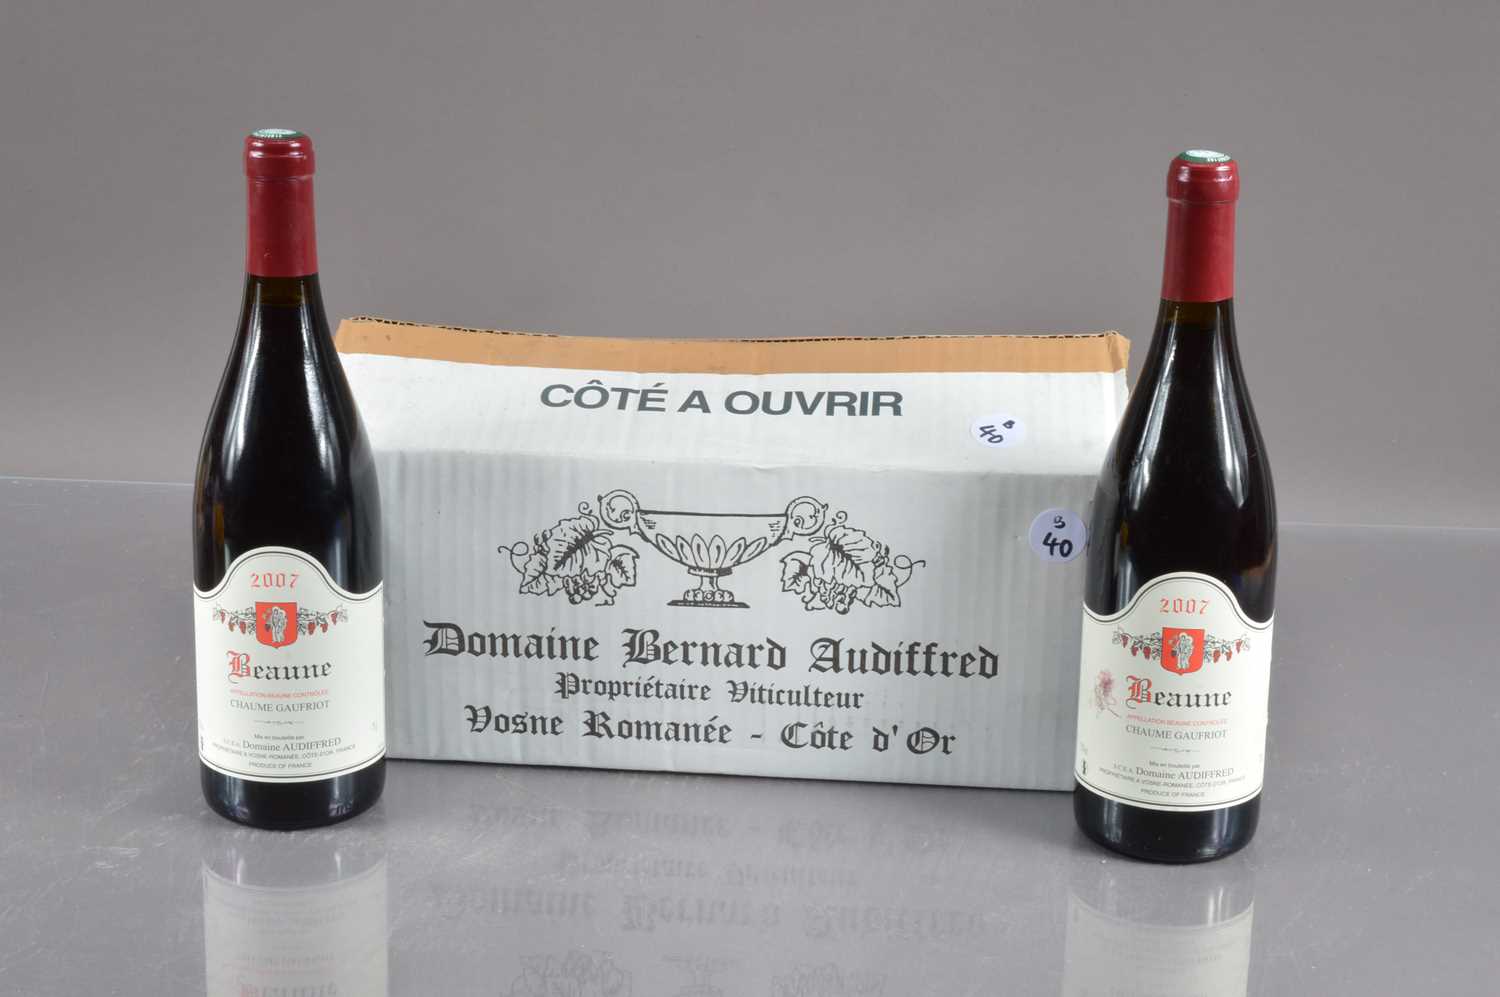 Six bottles of Beaune Chaume Gaufriot 2007,